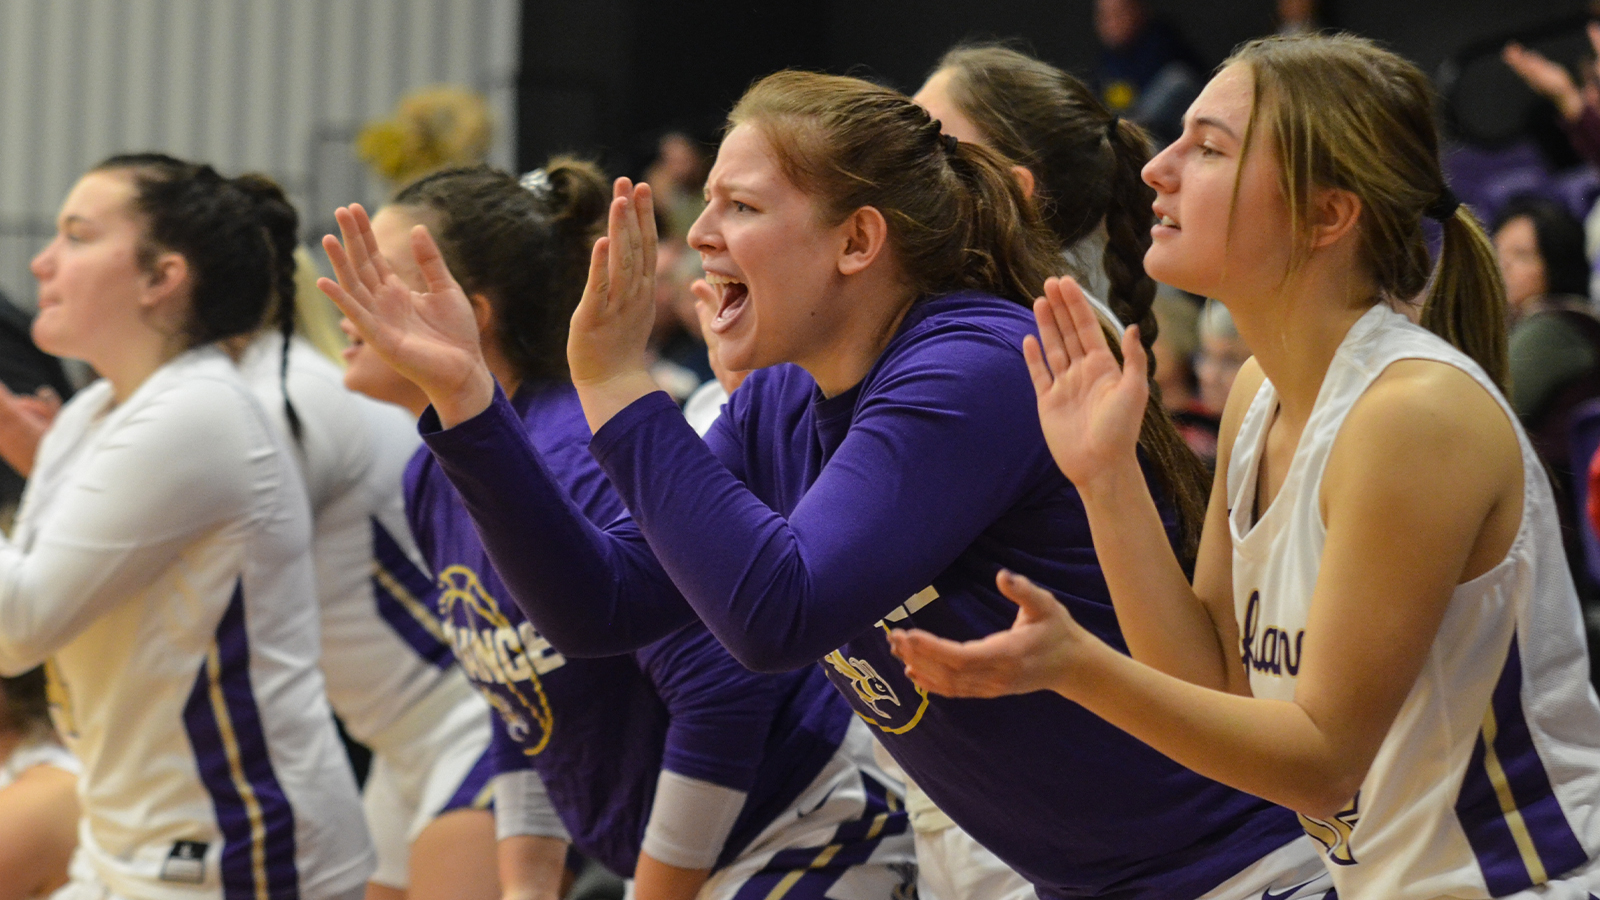 WBB Preview: Women’s basketball heads to Hanover on Saturday